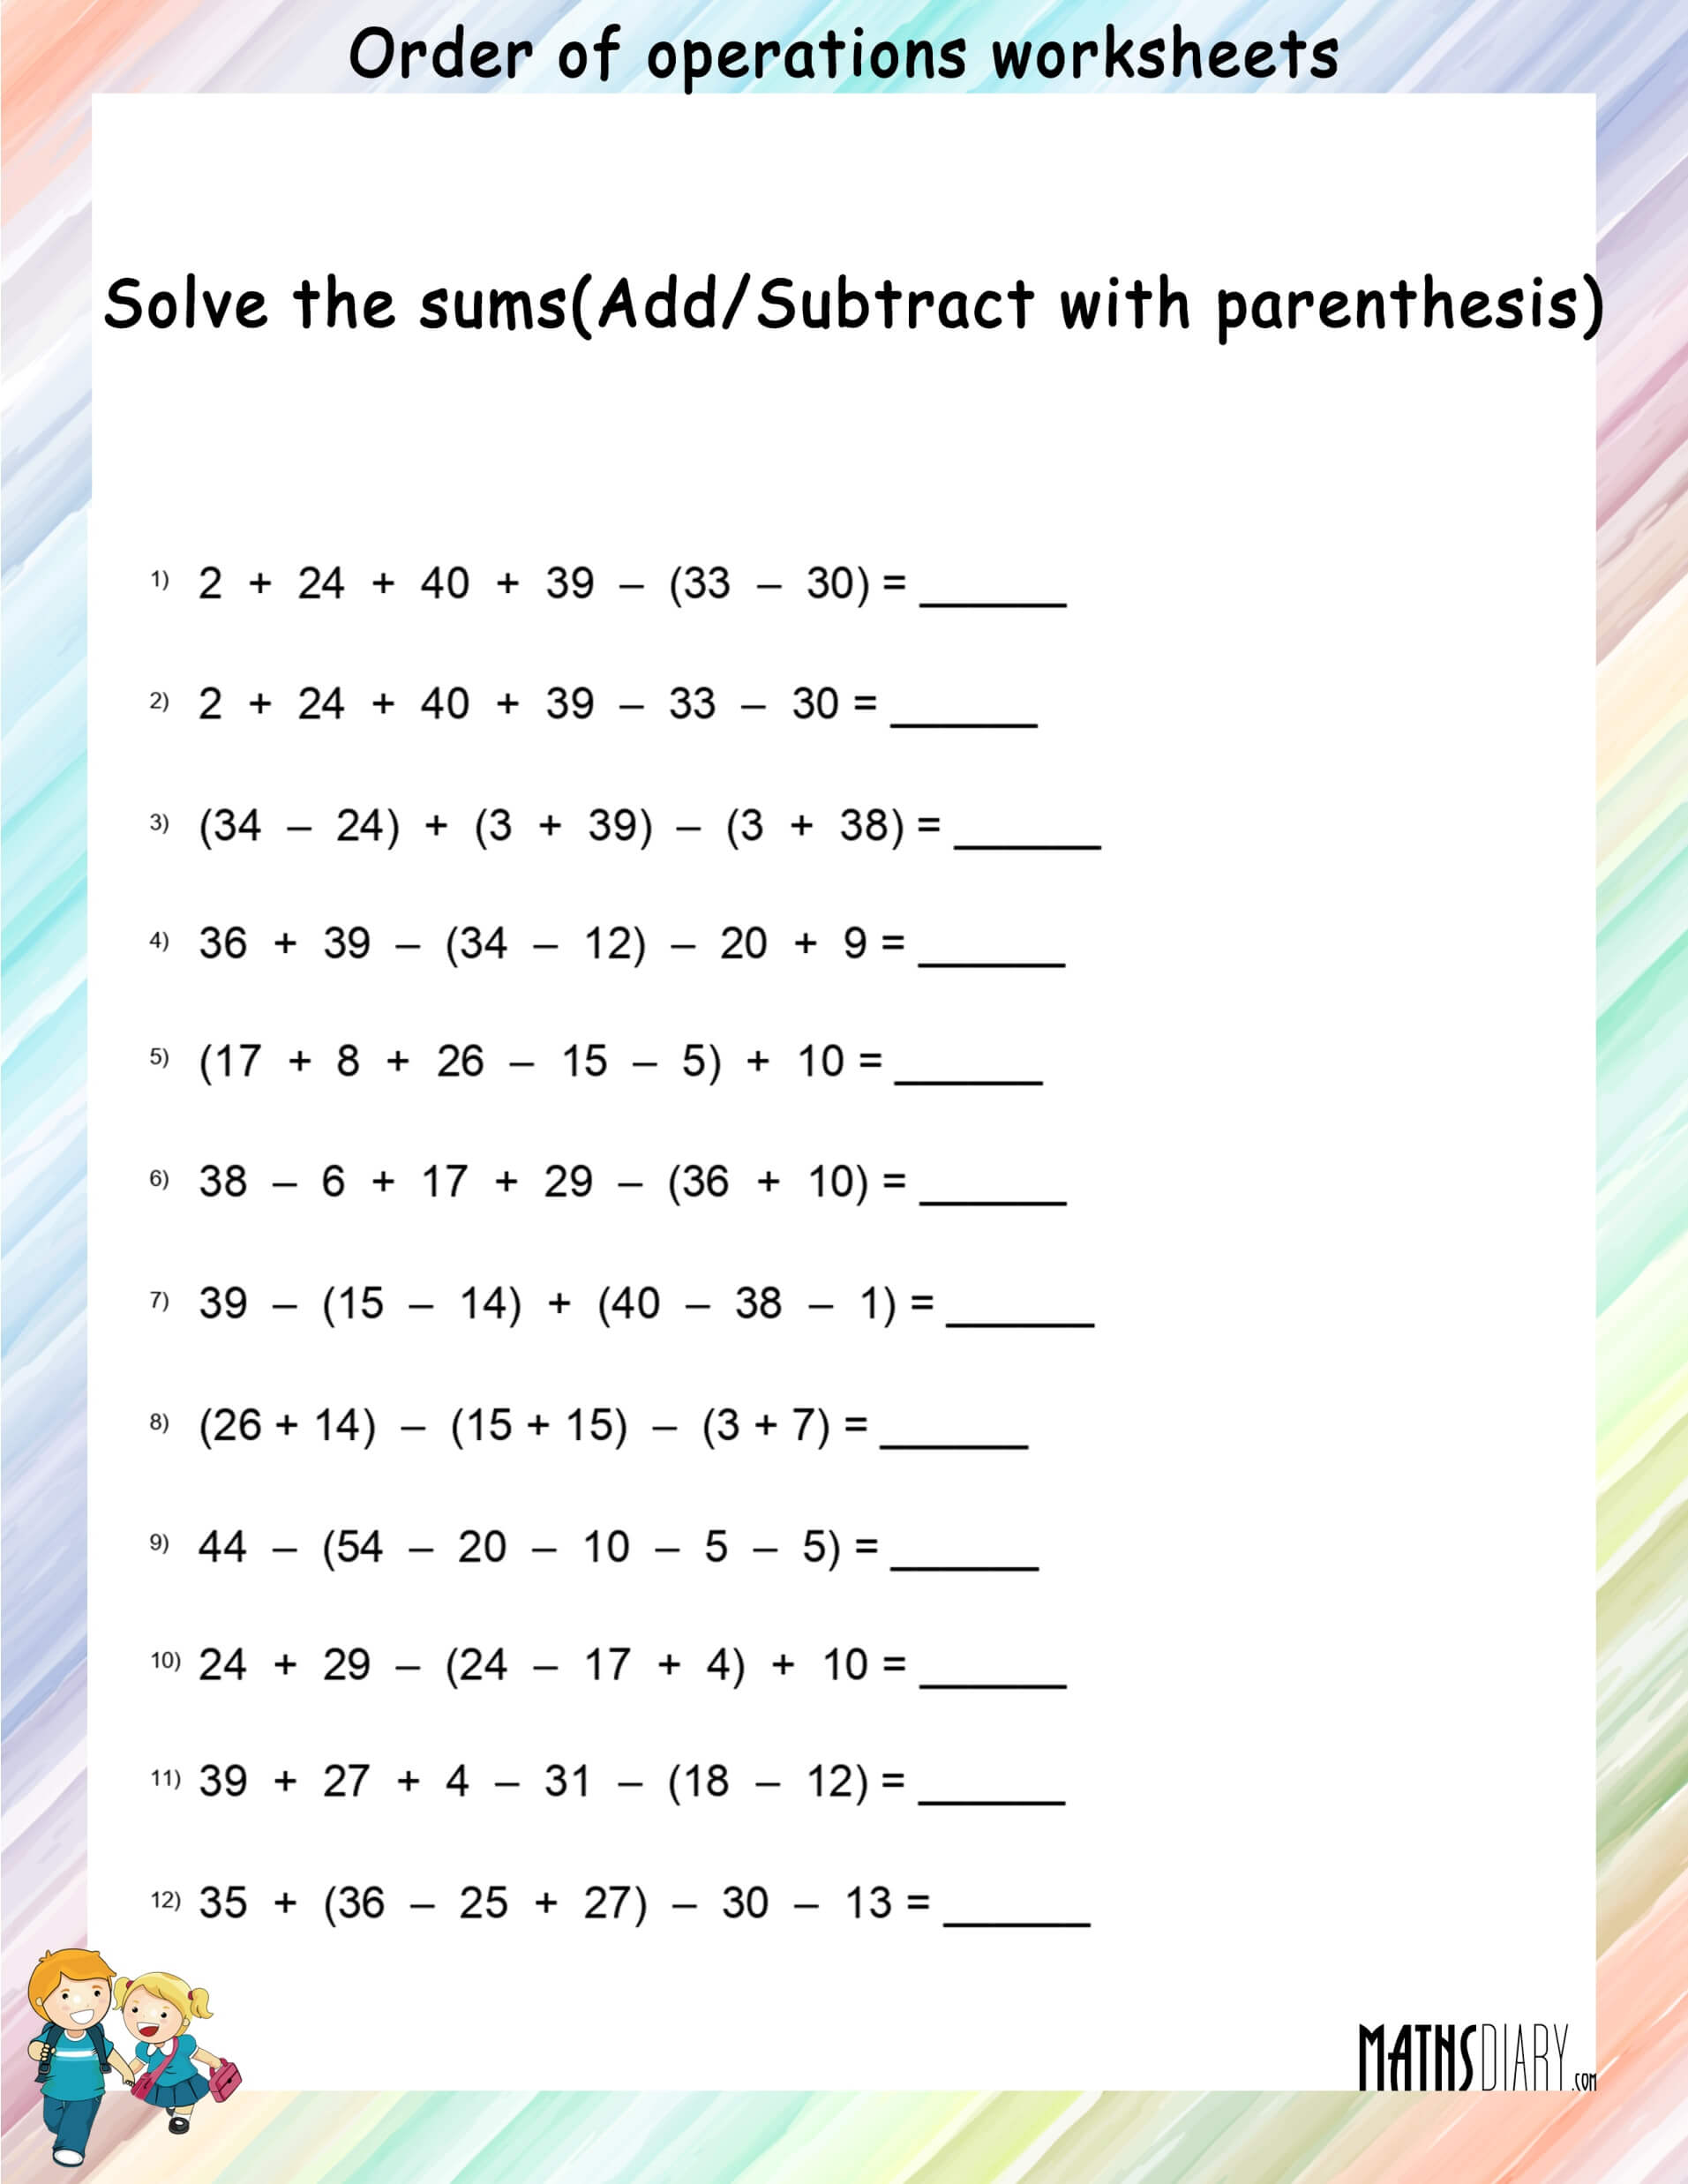 practice-the-order-of-operations-with-these-free-math-worksheets